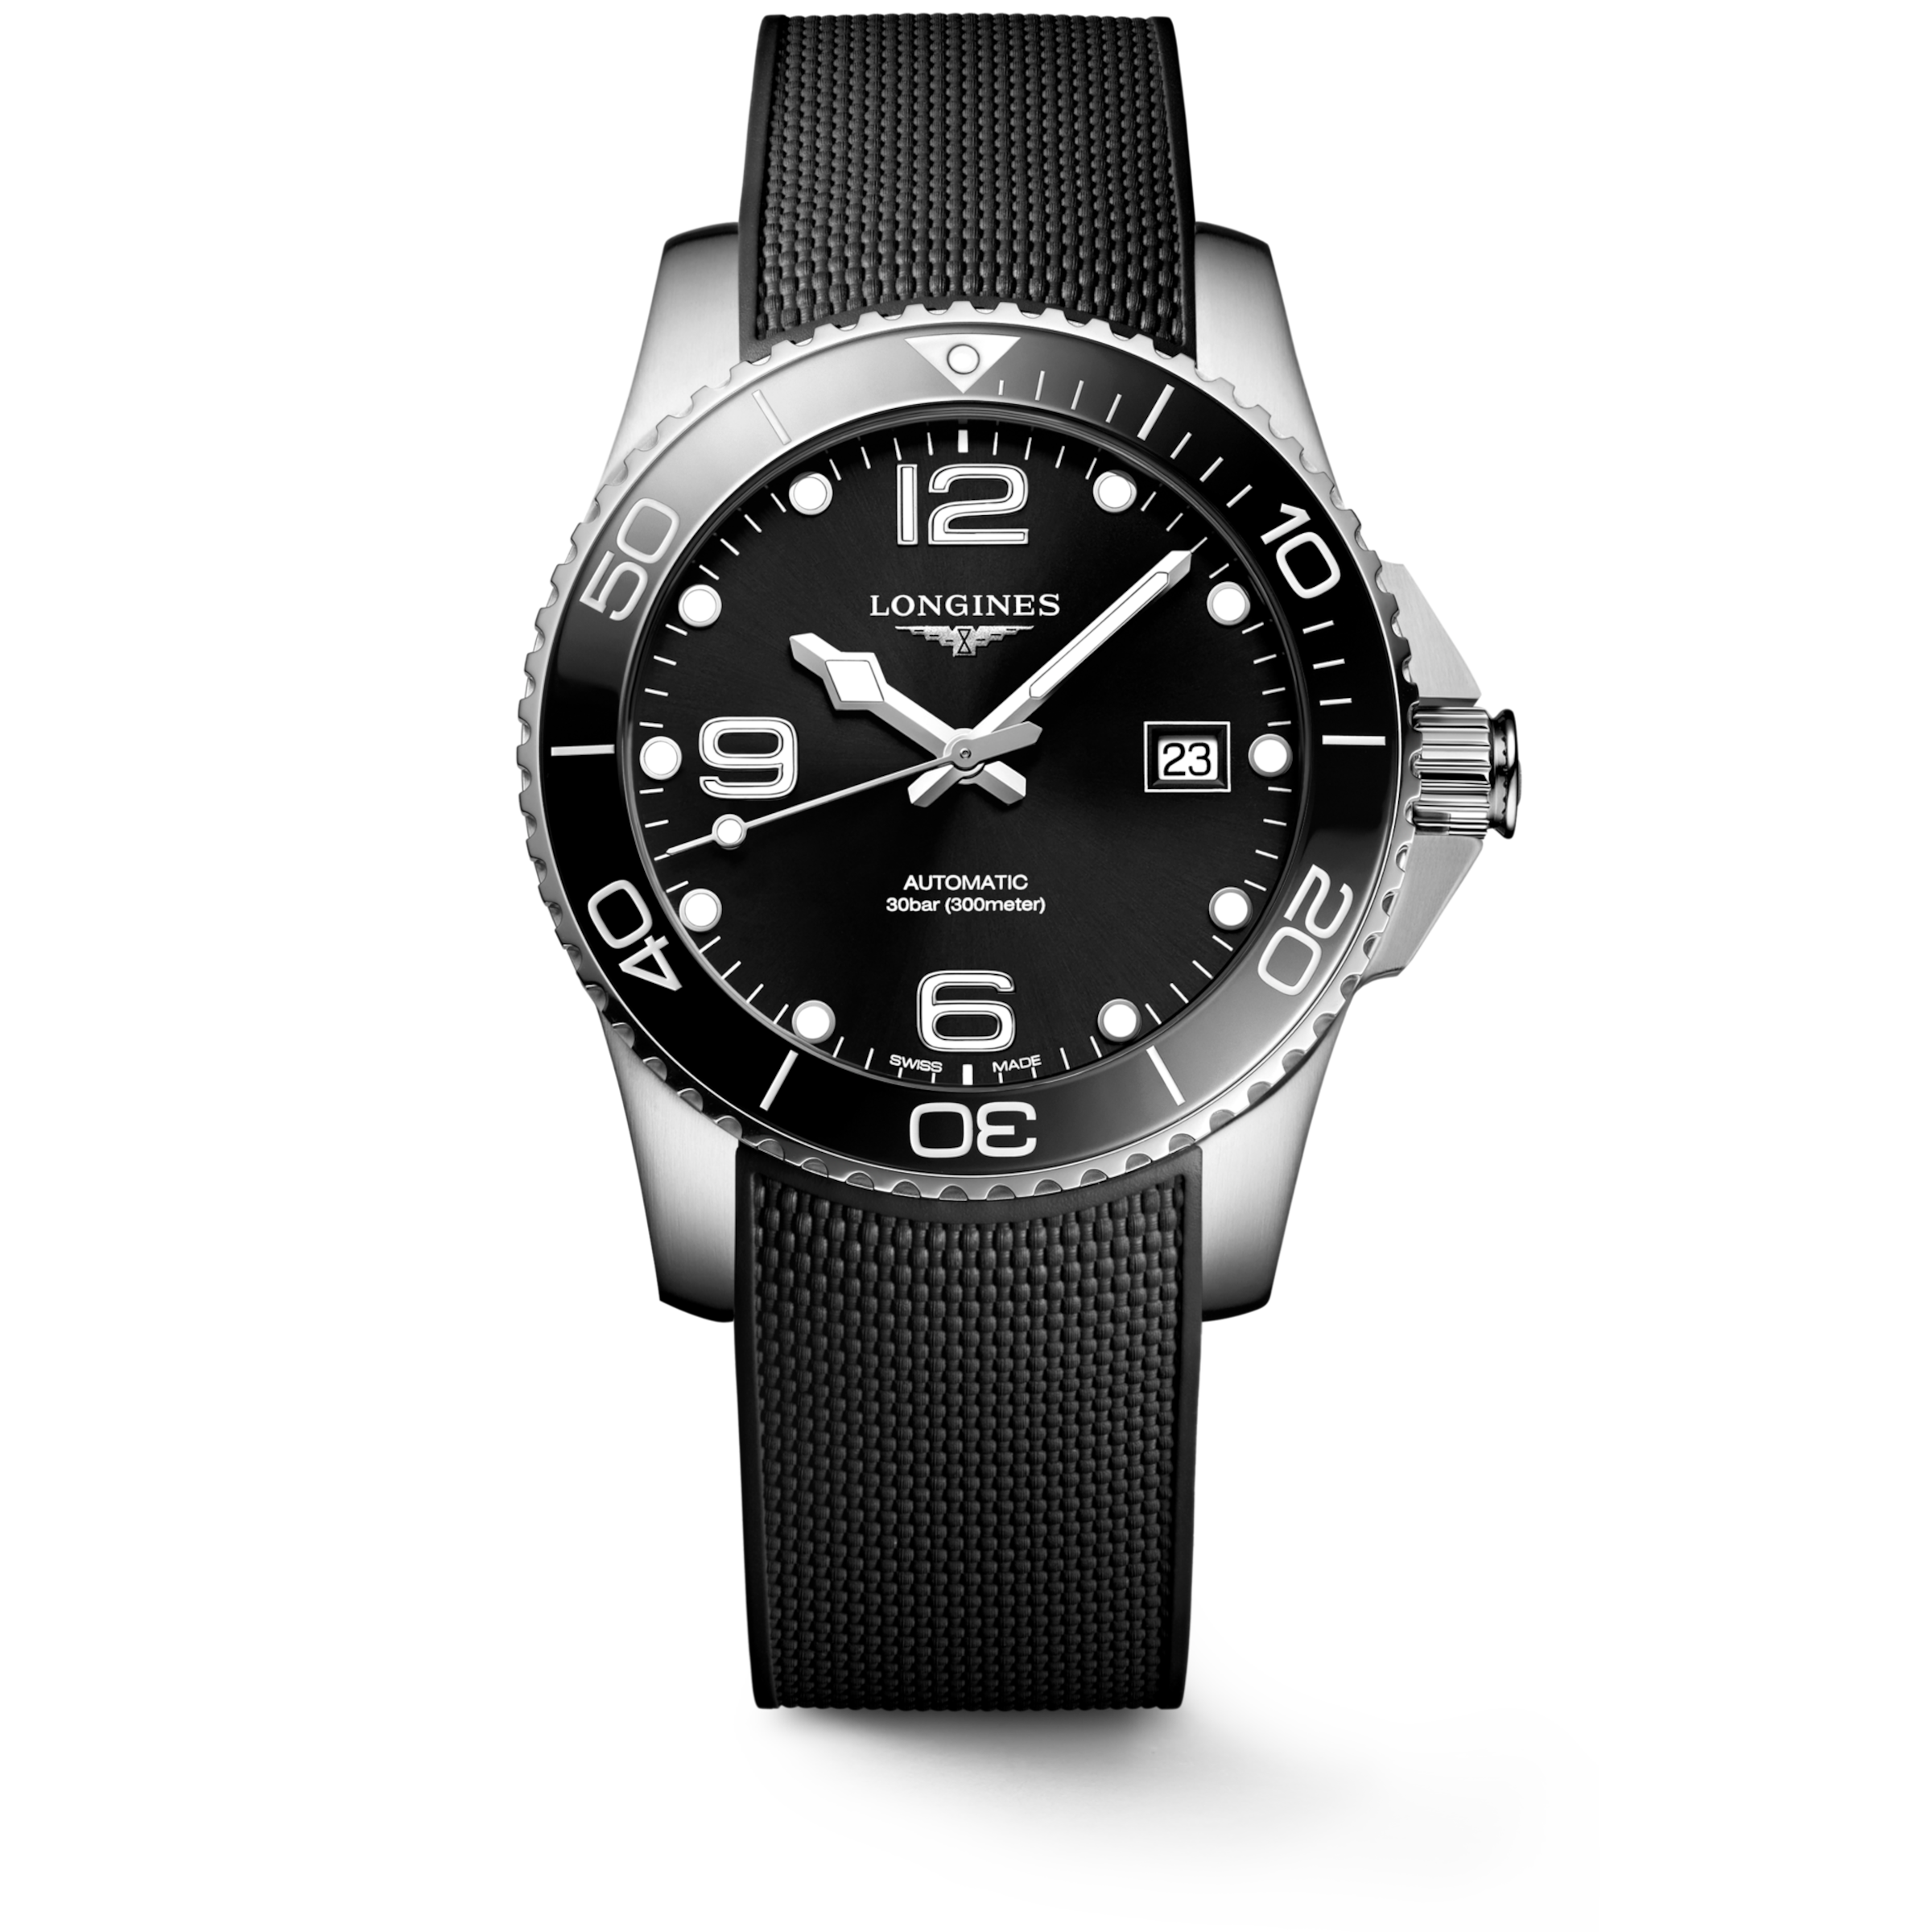 Longines HYDROCONQUEST Automatic Stainless steel and ceramic bezel Watch - L3.781.4.56.9